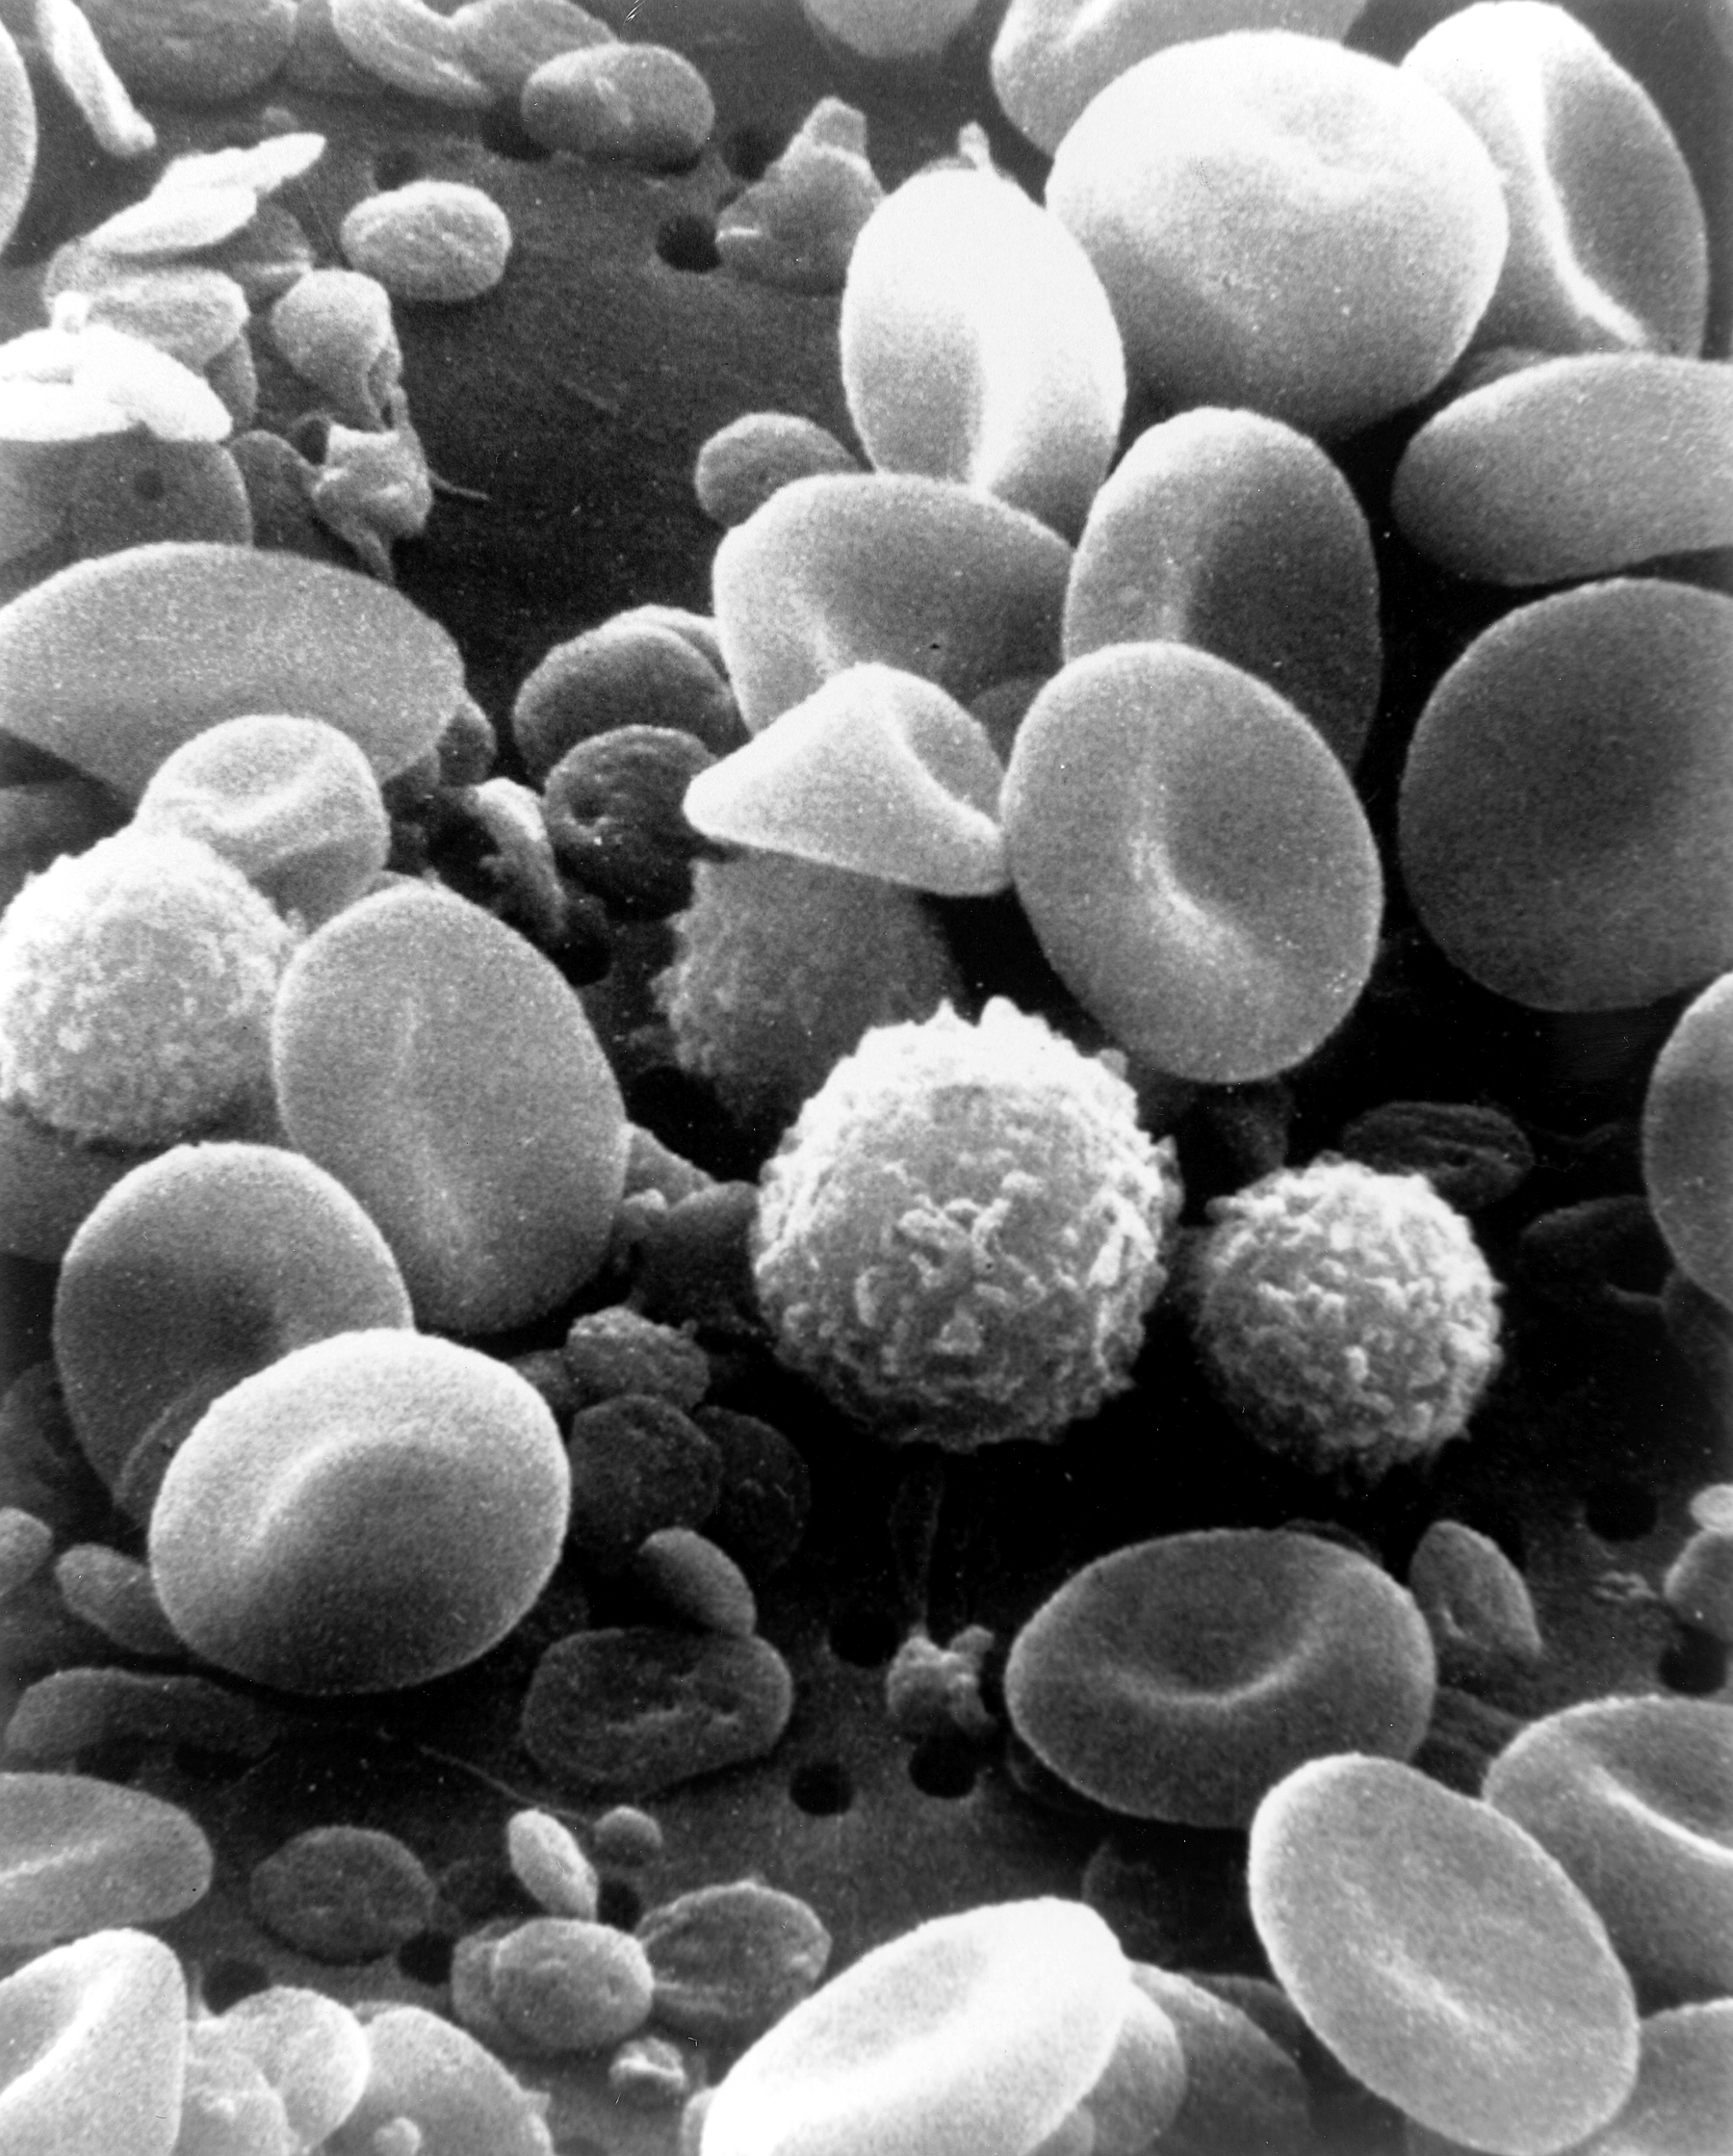 A scanning electron microscope image of normal circulating human blood. One can see red blood cells, several knobby white blood cells including lymphocytes, a monocyte, a neutrophil, and many small disc-shape platelets.